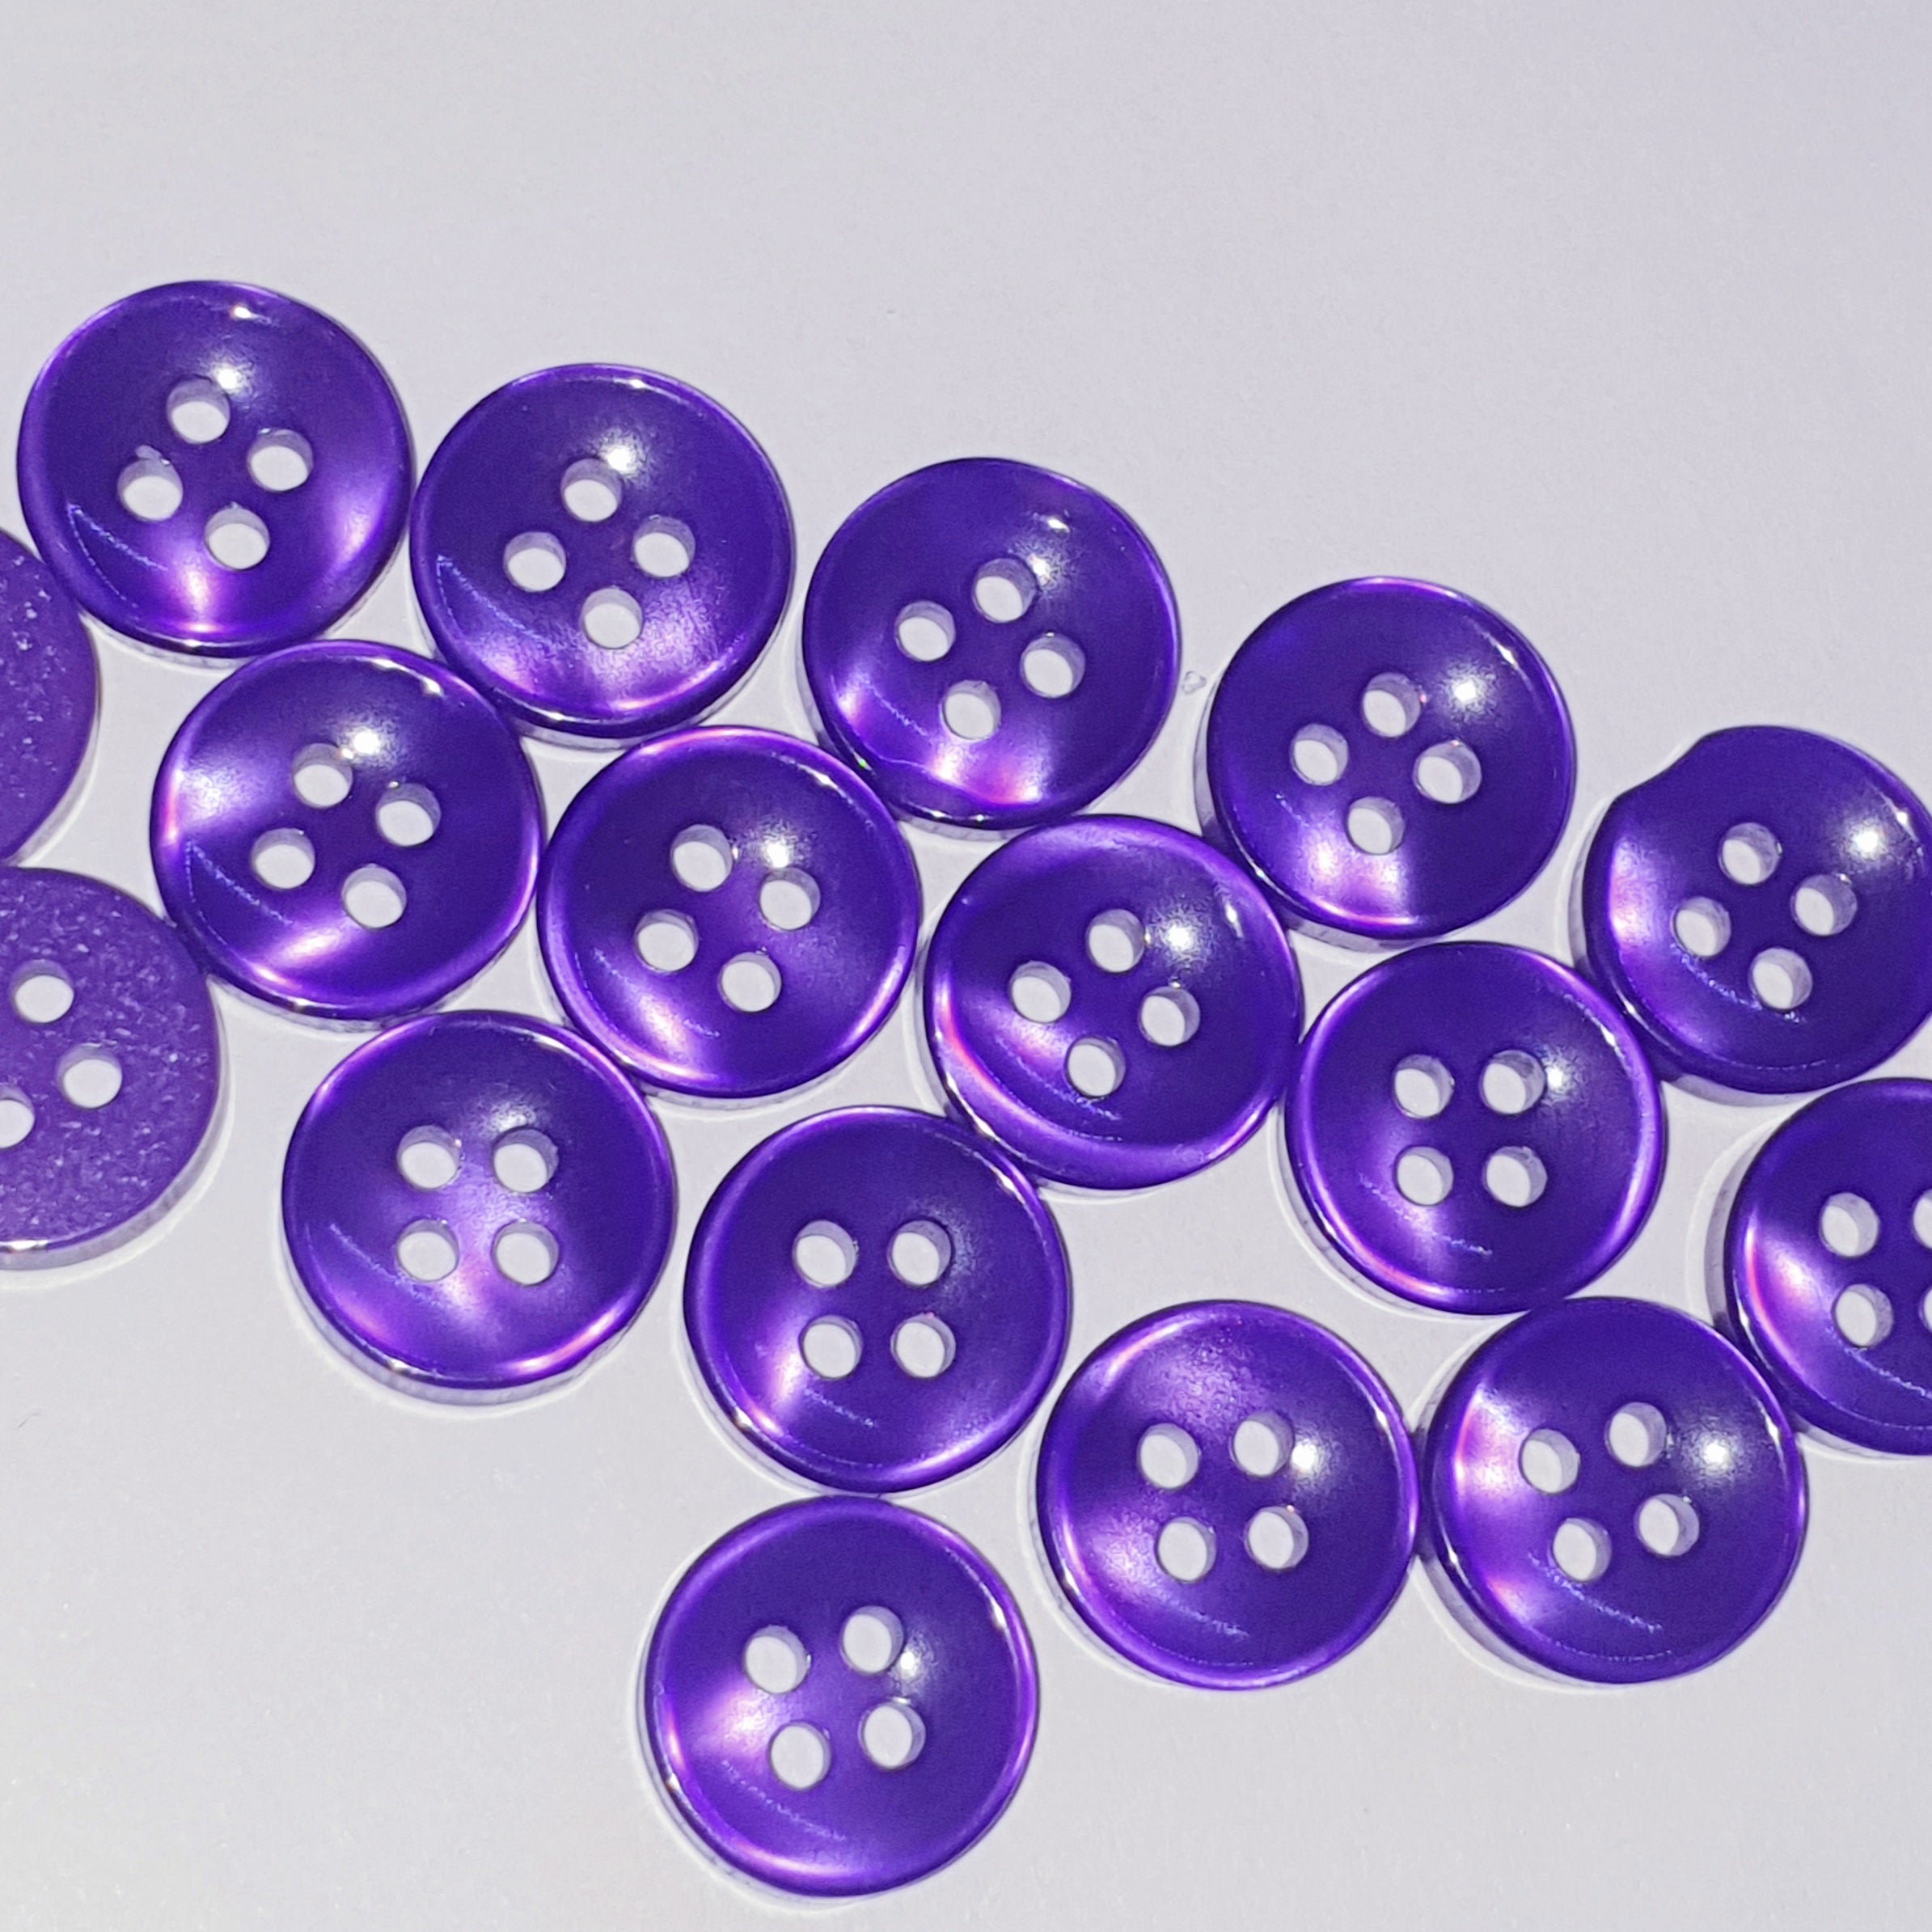 MajorCrafts 80pcs 11.5mm Dark Purple Pearlescent 4 Holes High-Grade Round Resin Small Sewing Buttons